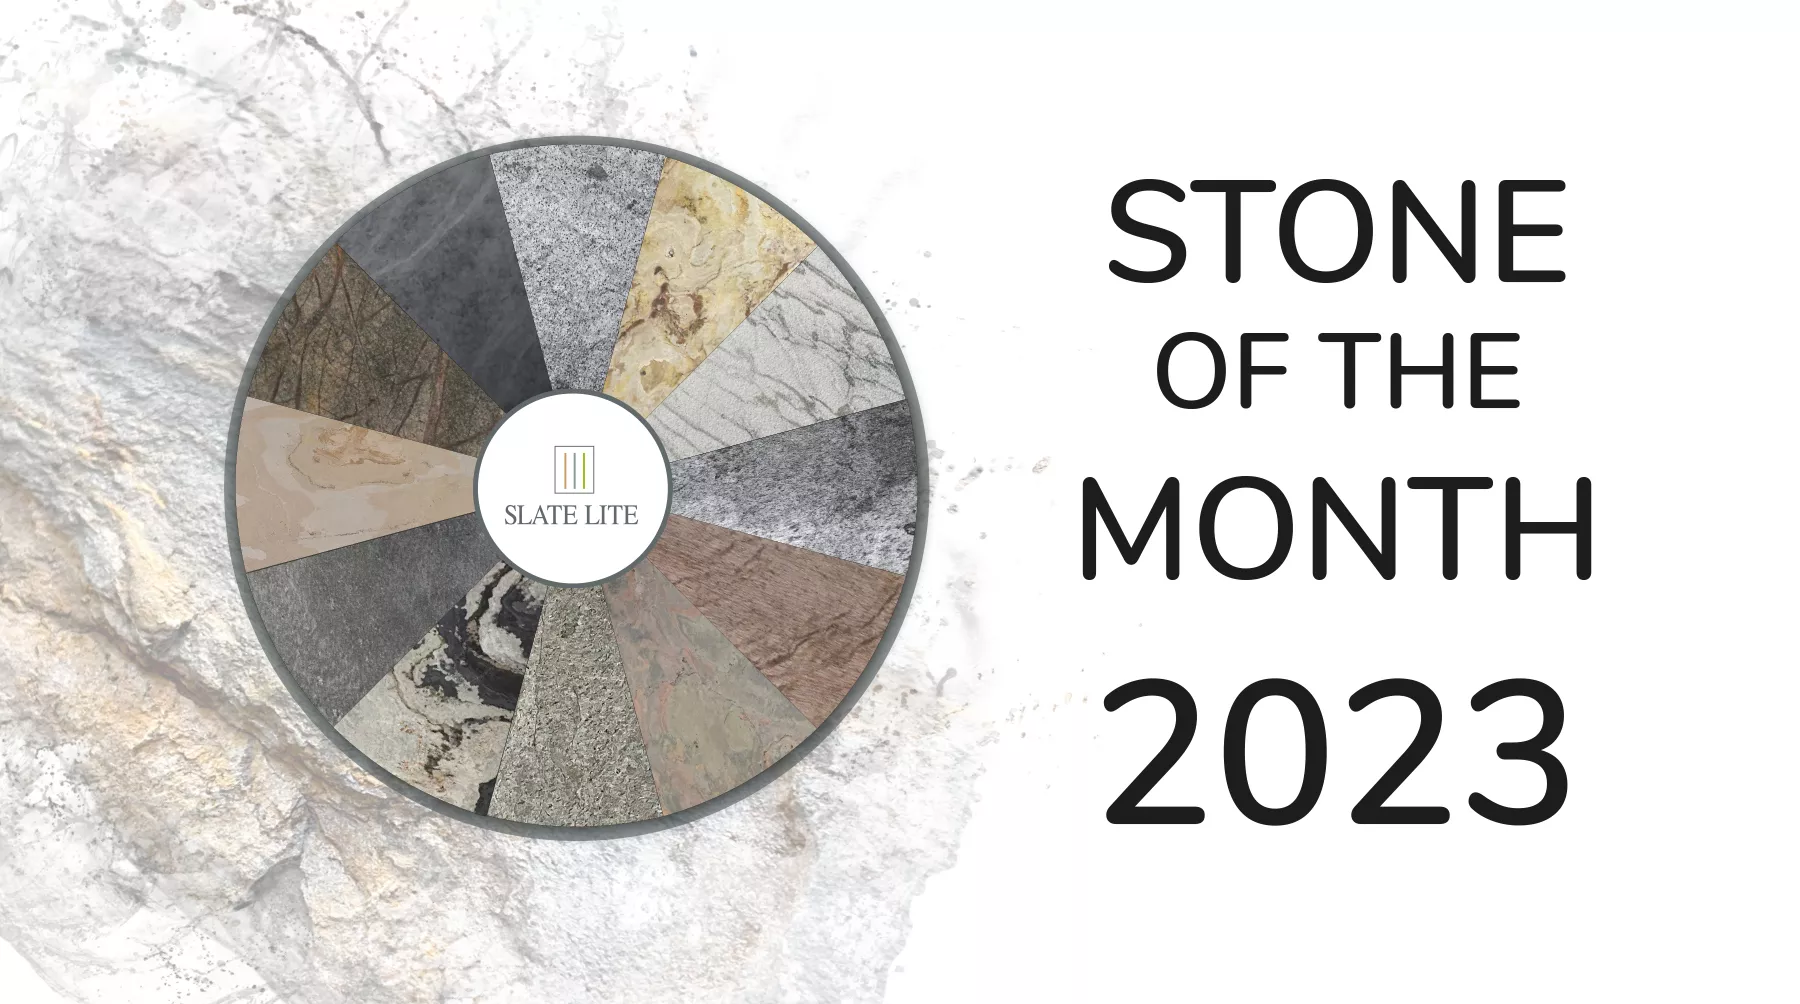 Stone of the month 2023